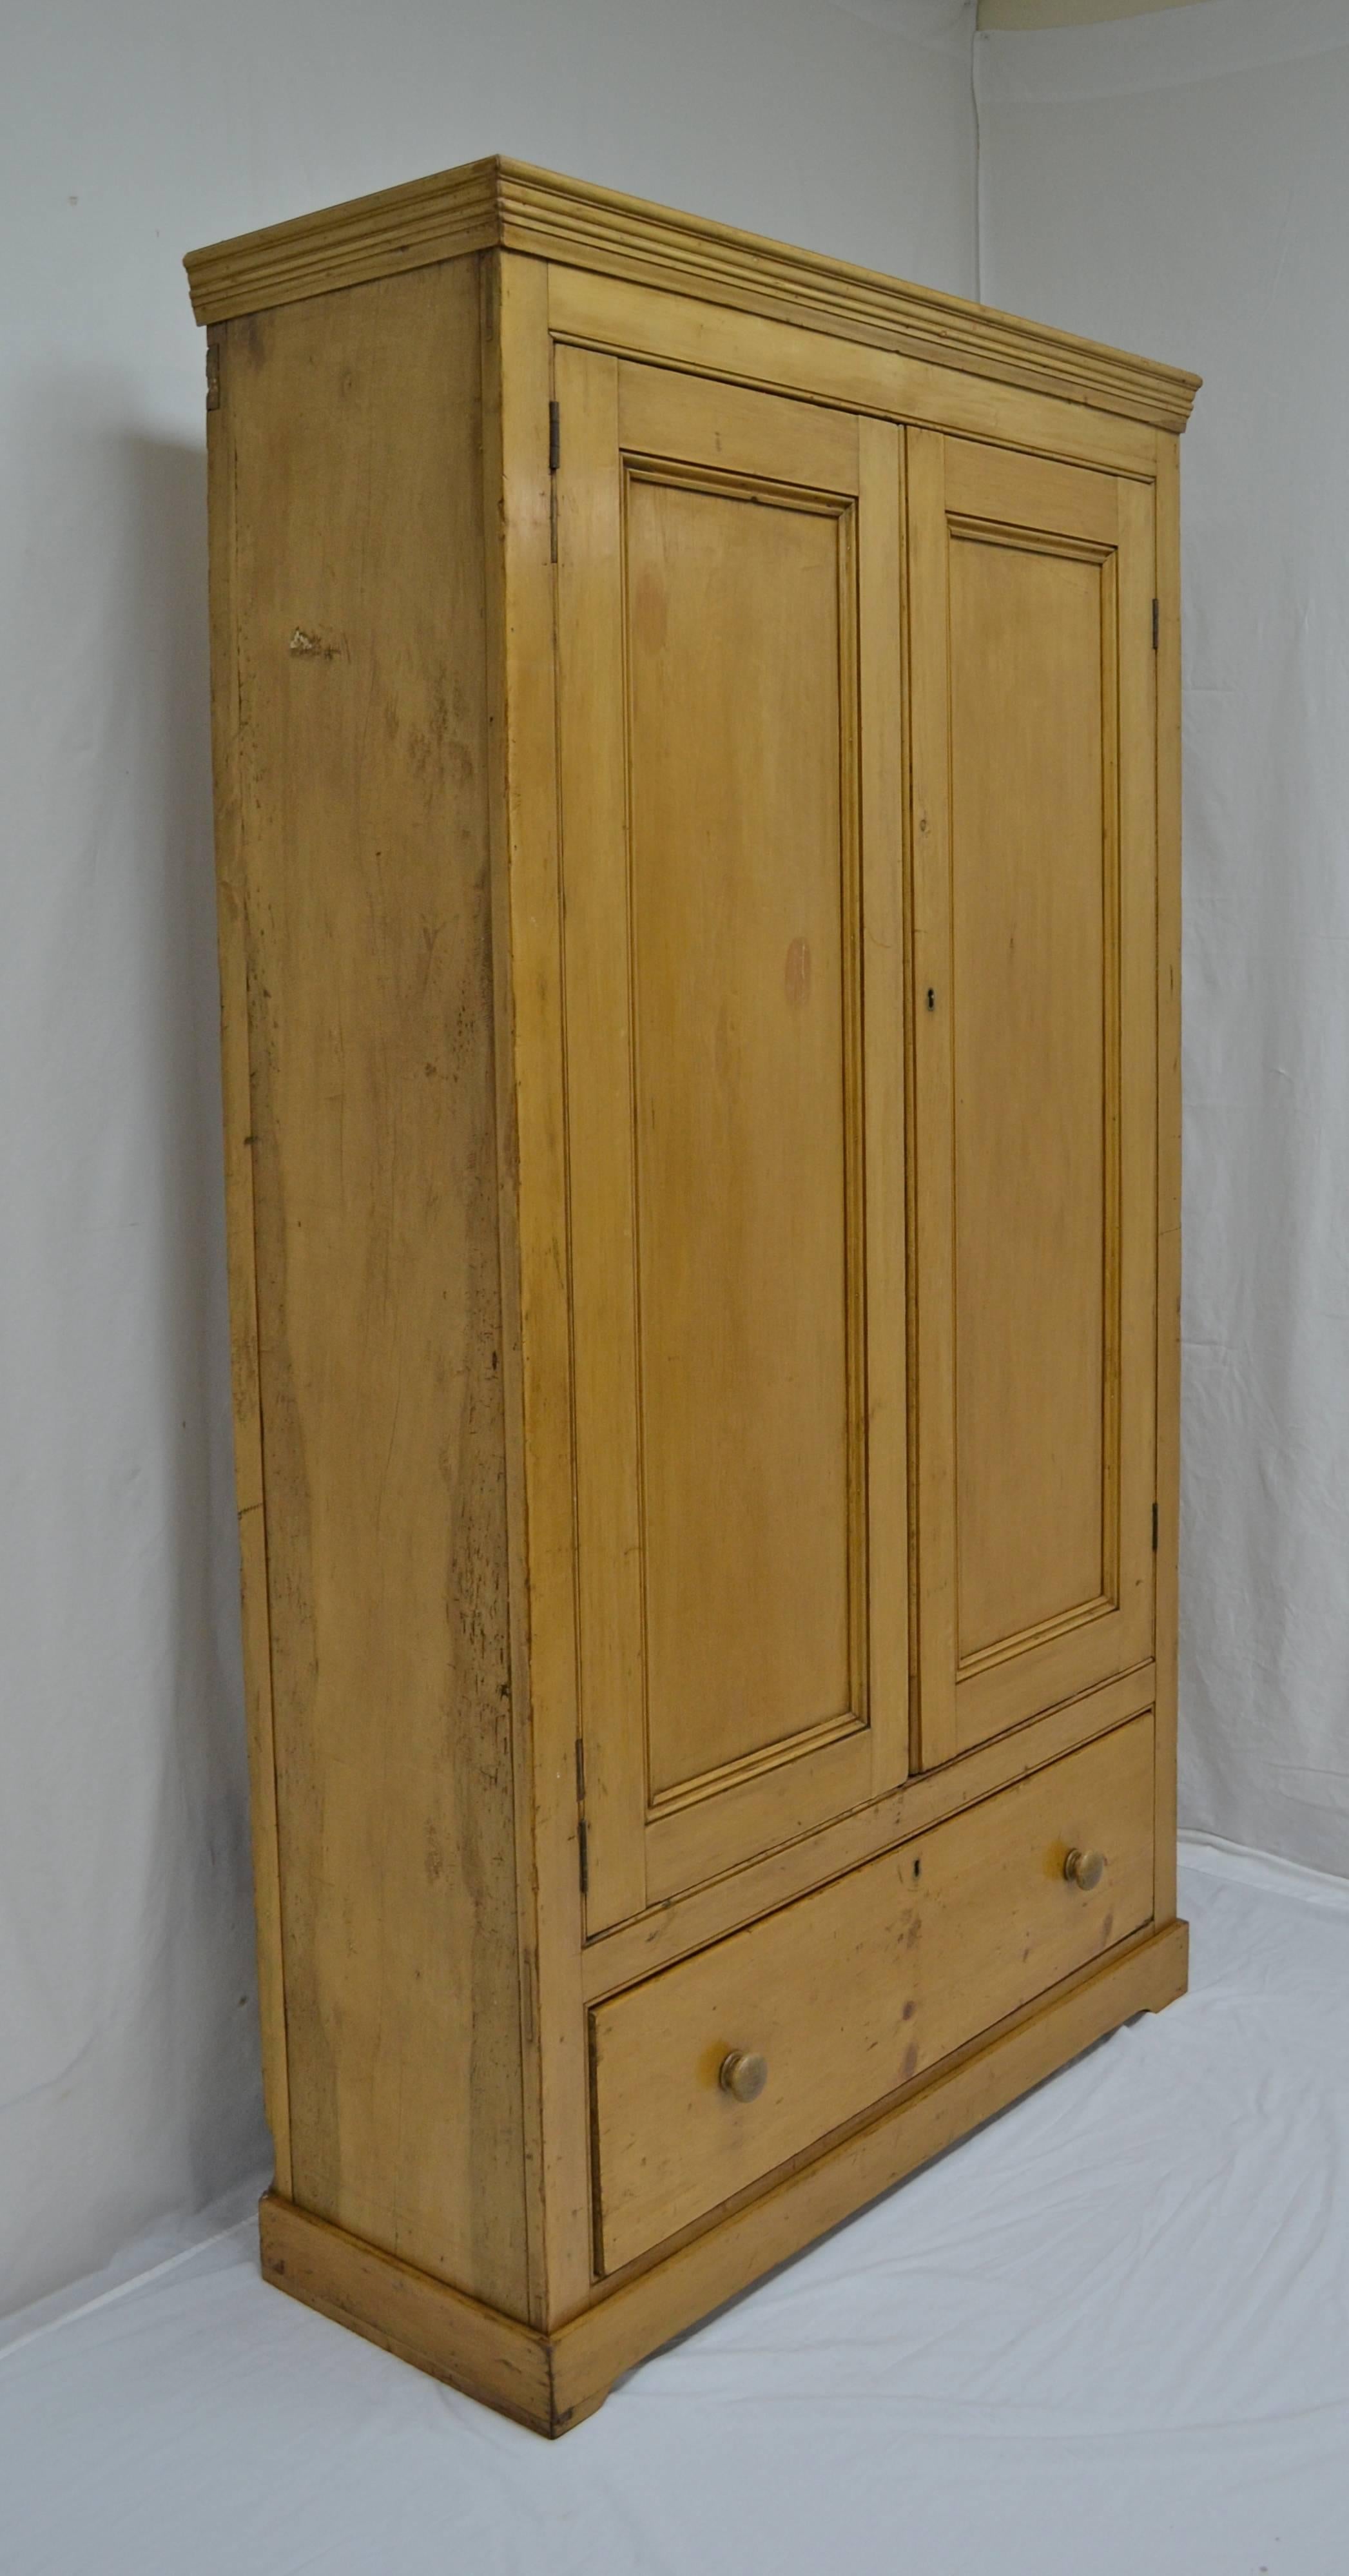 This charming little wardrobe is about as plain and simple and well-made as a piece of English Victorian pine furniture can be. Beneath a tidy crown molding are two paneled doors and one deep, delicately dovetailed drawer with original oak knobs.